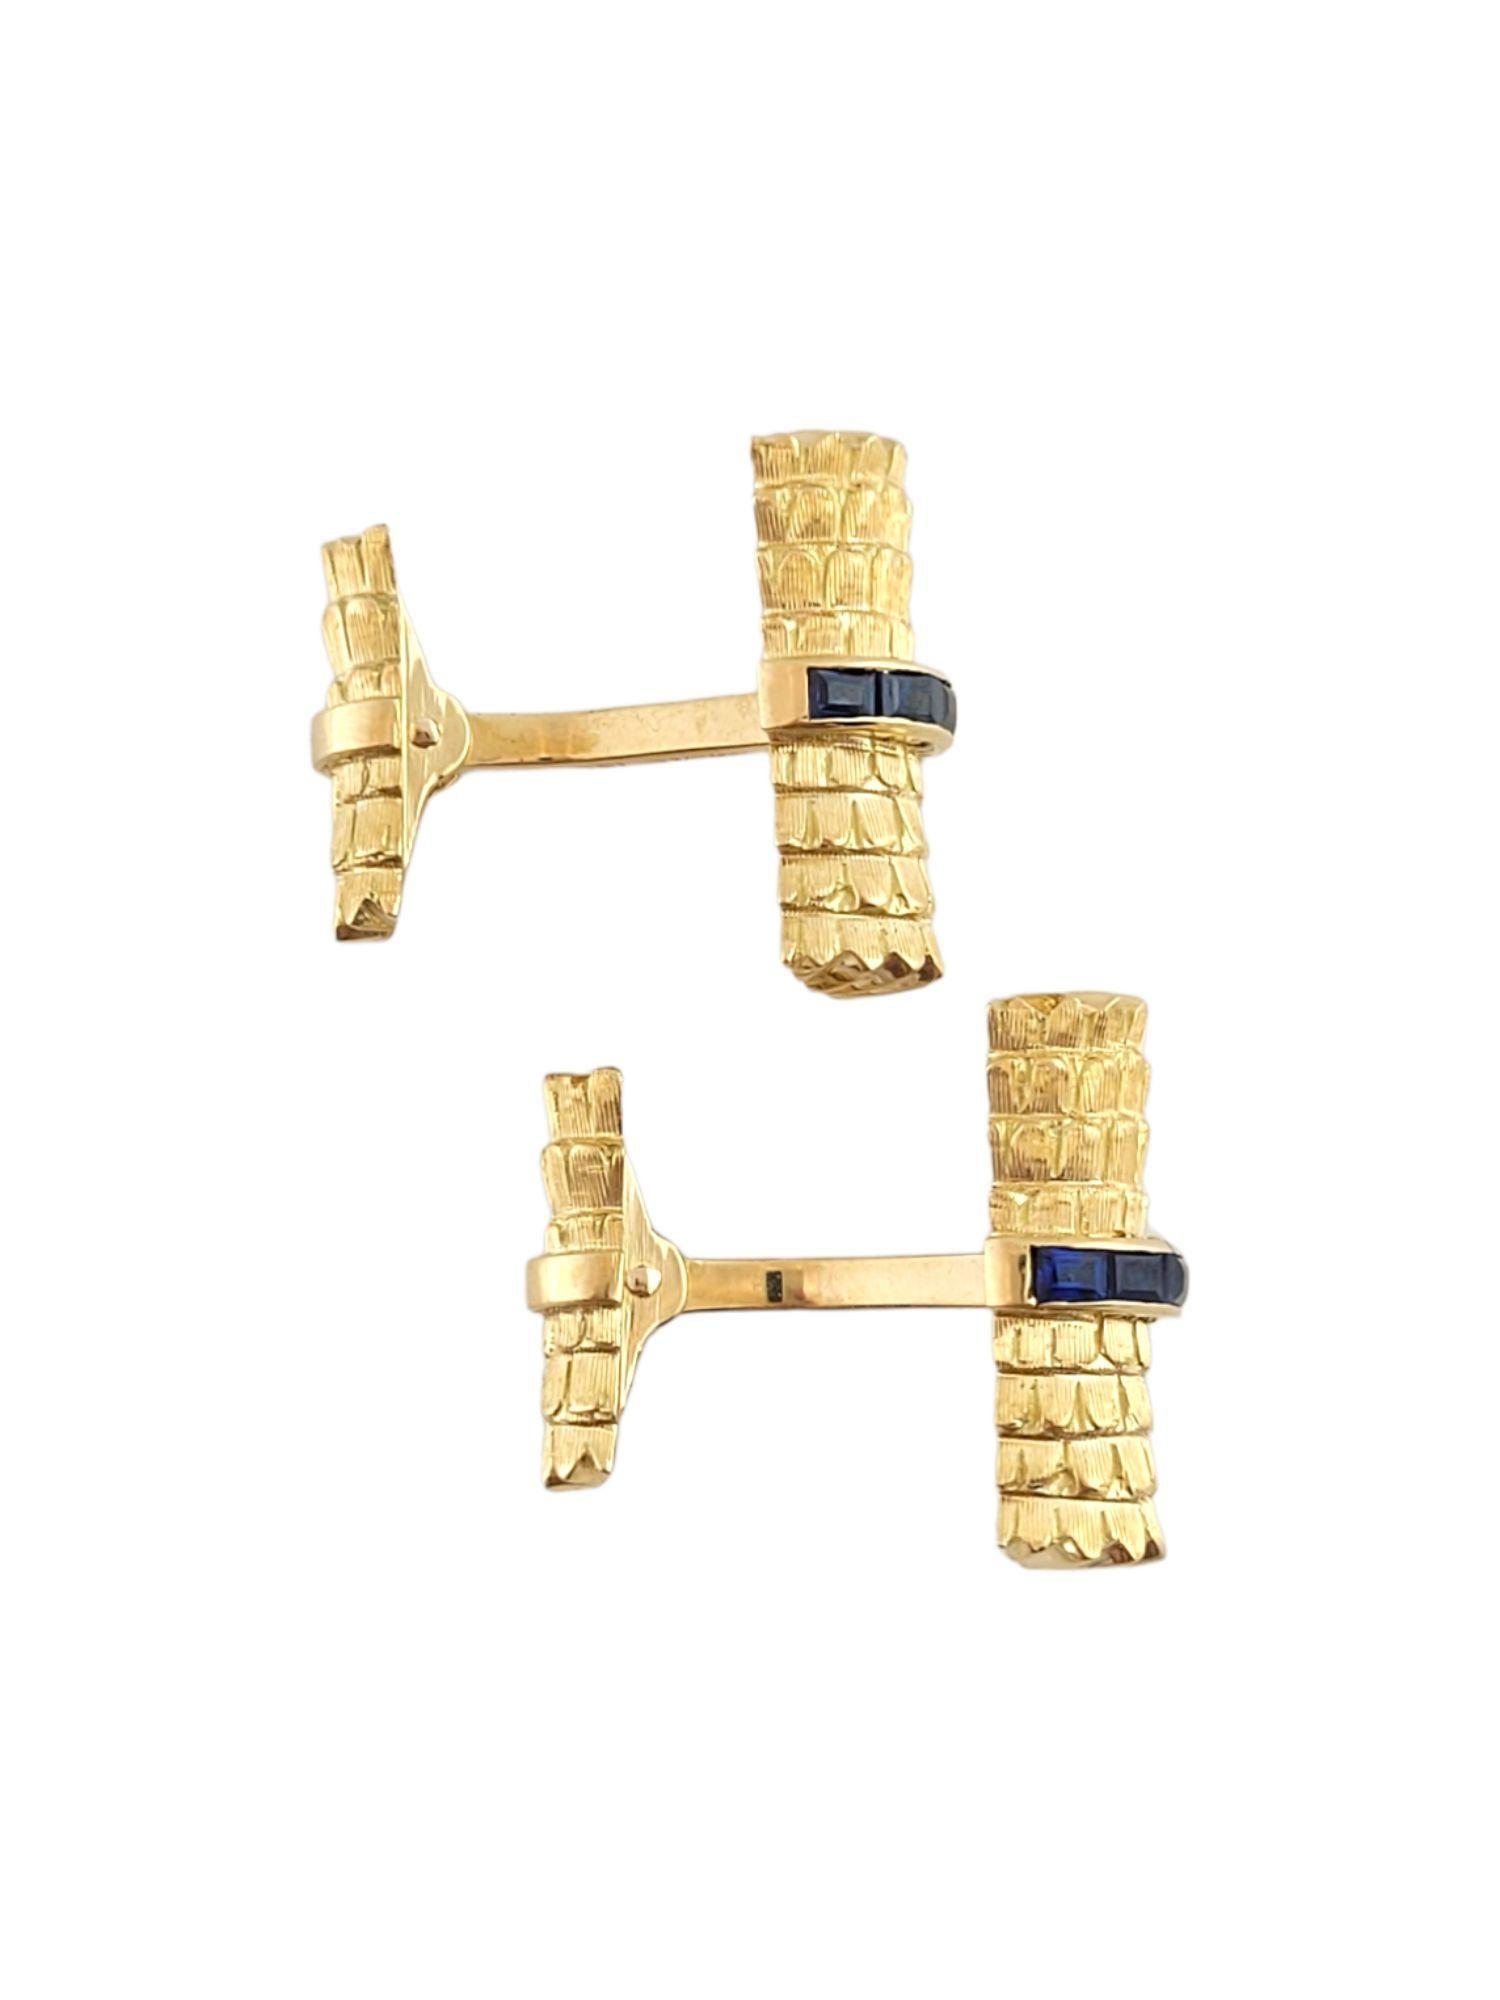 Tiffany & Co 18K Yellow Gold & Sapphire Cufflink and Stud Set #14812 In Good Condition For Sale In Washington Depot, CT